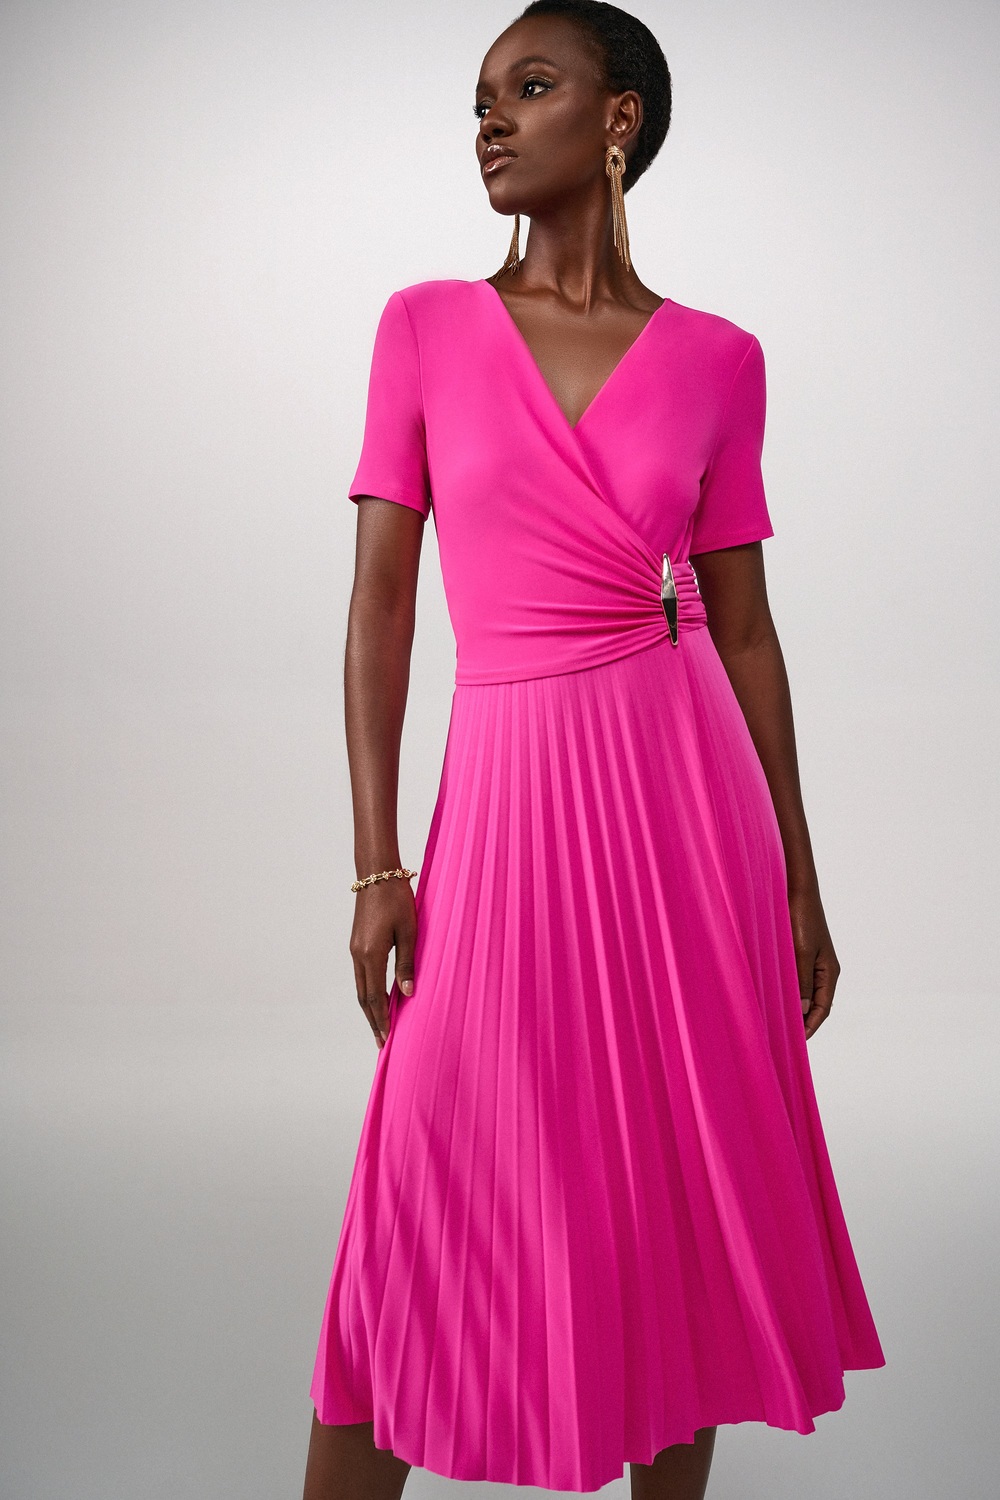 Wrap Front Pleated Dress Style 241013. Ultra Pink